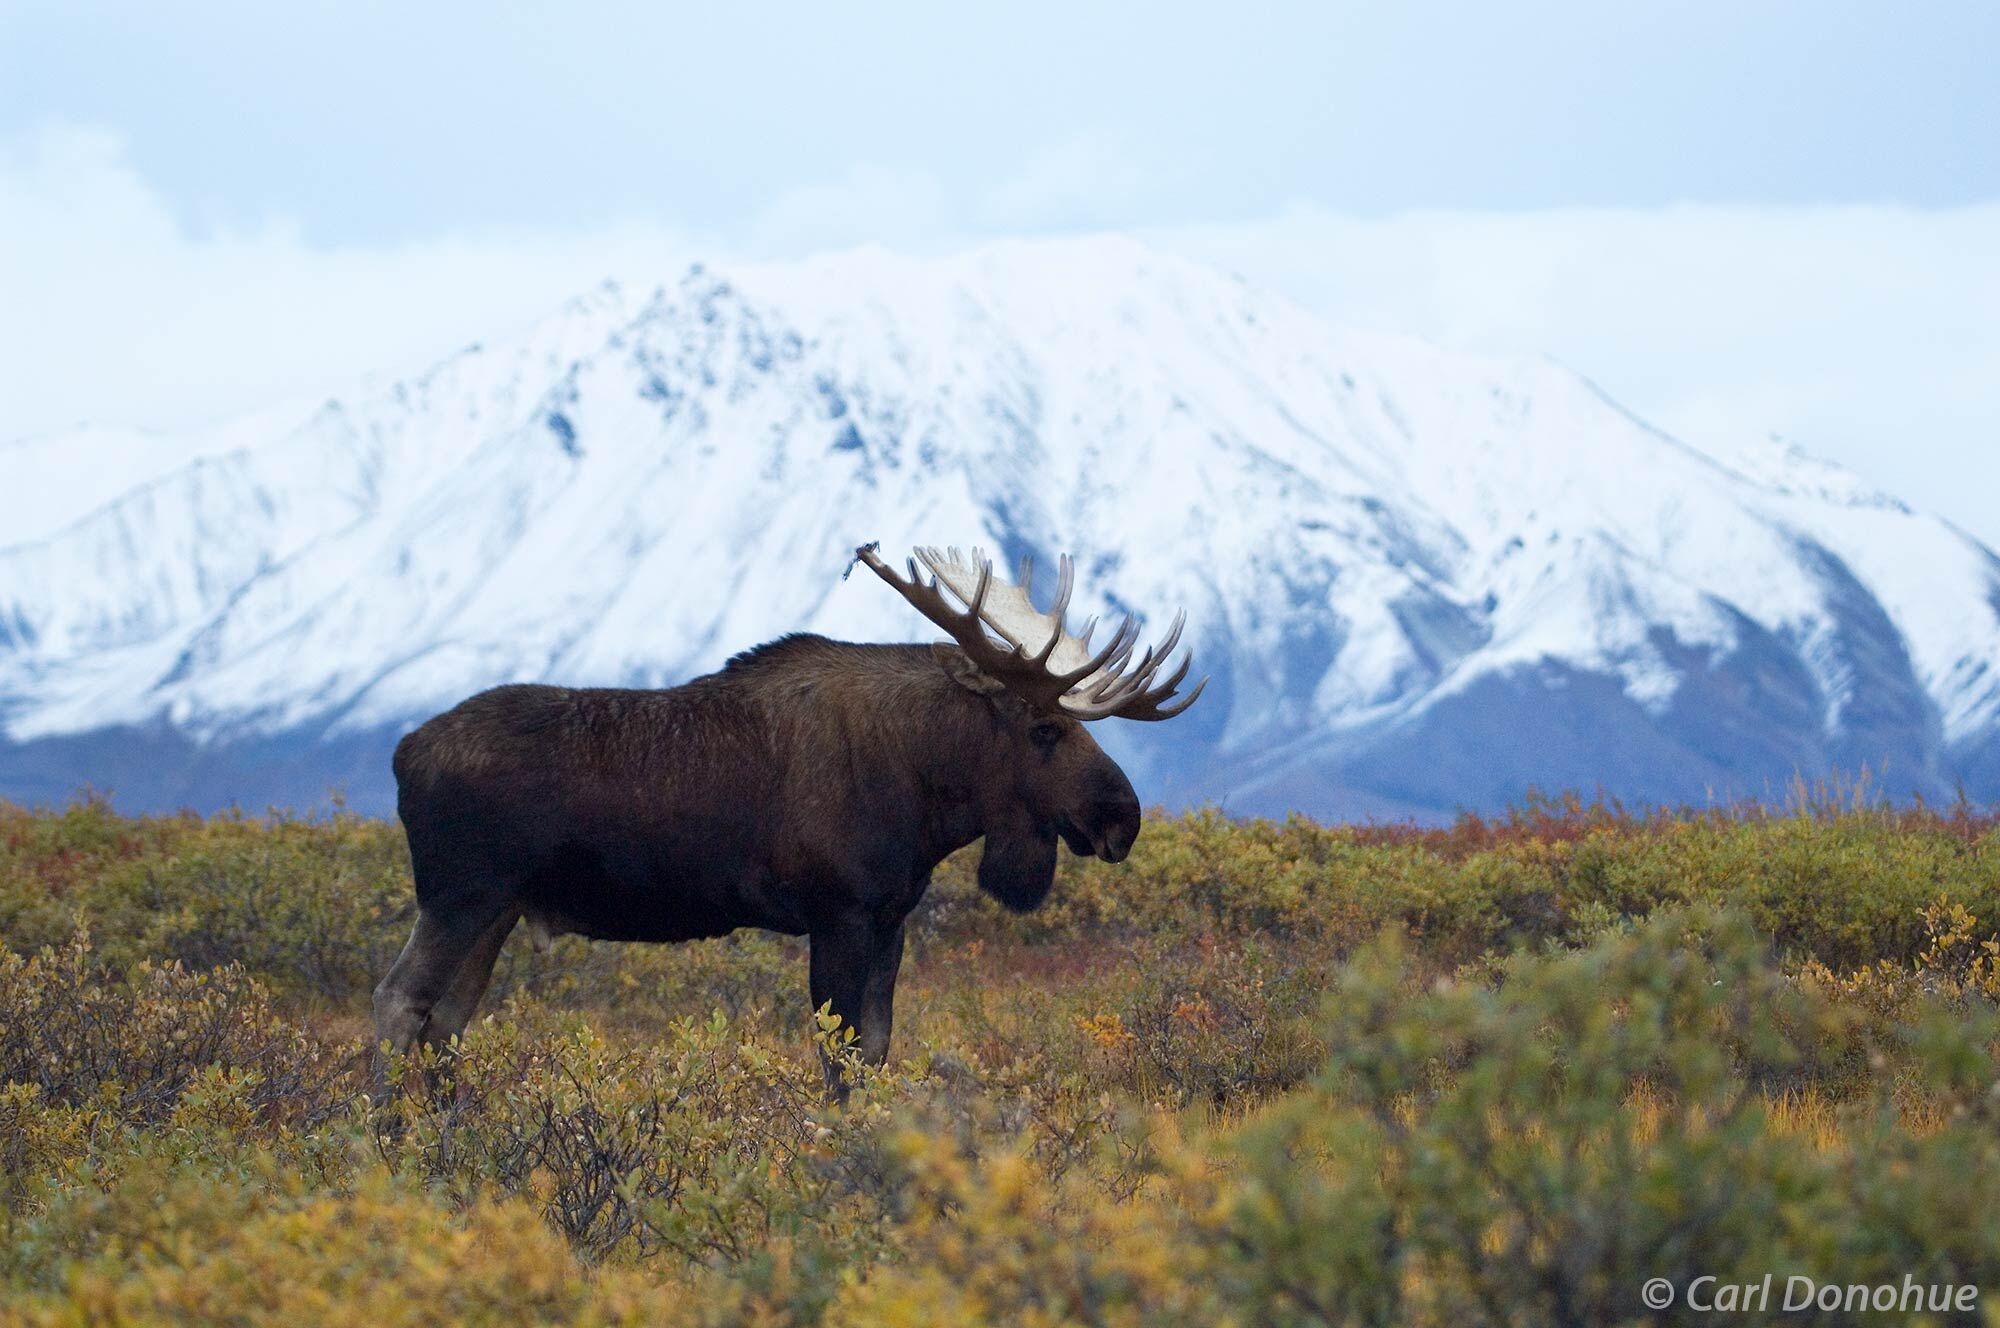 A magnificent bull moose, or male moose, is standing on the tundra during fall. This is the time of year bull moose are shedding...